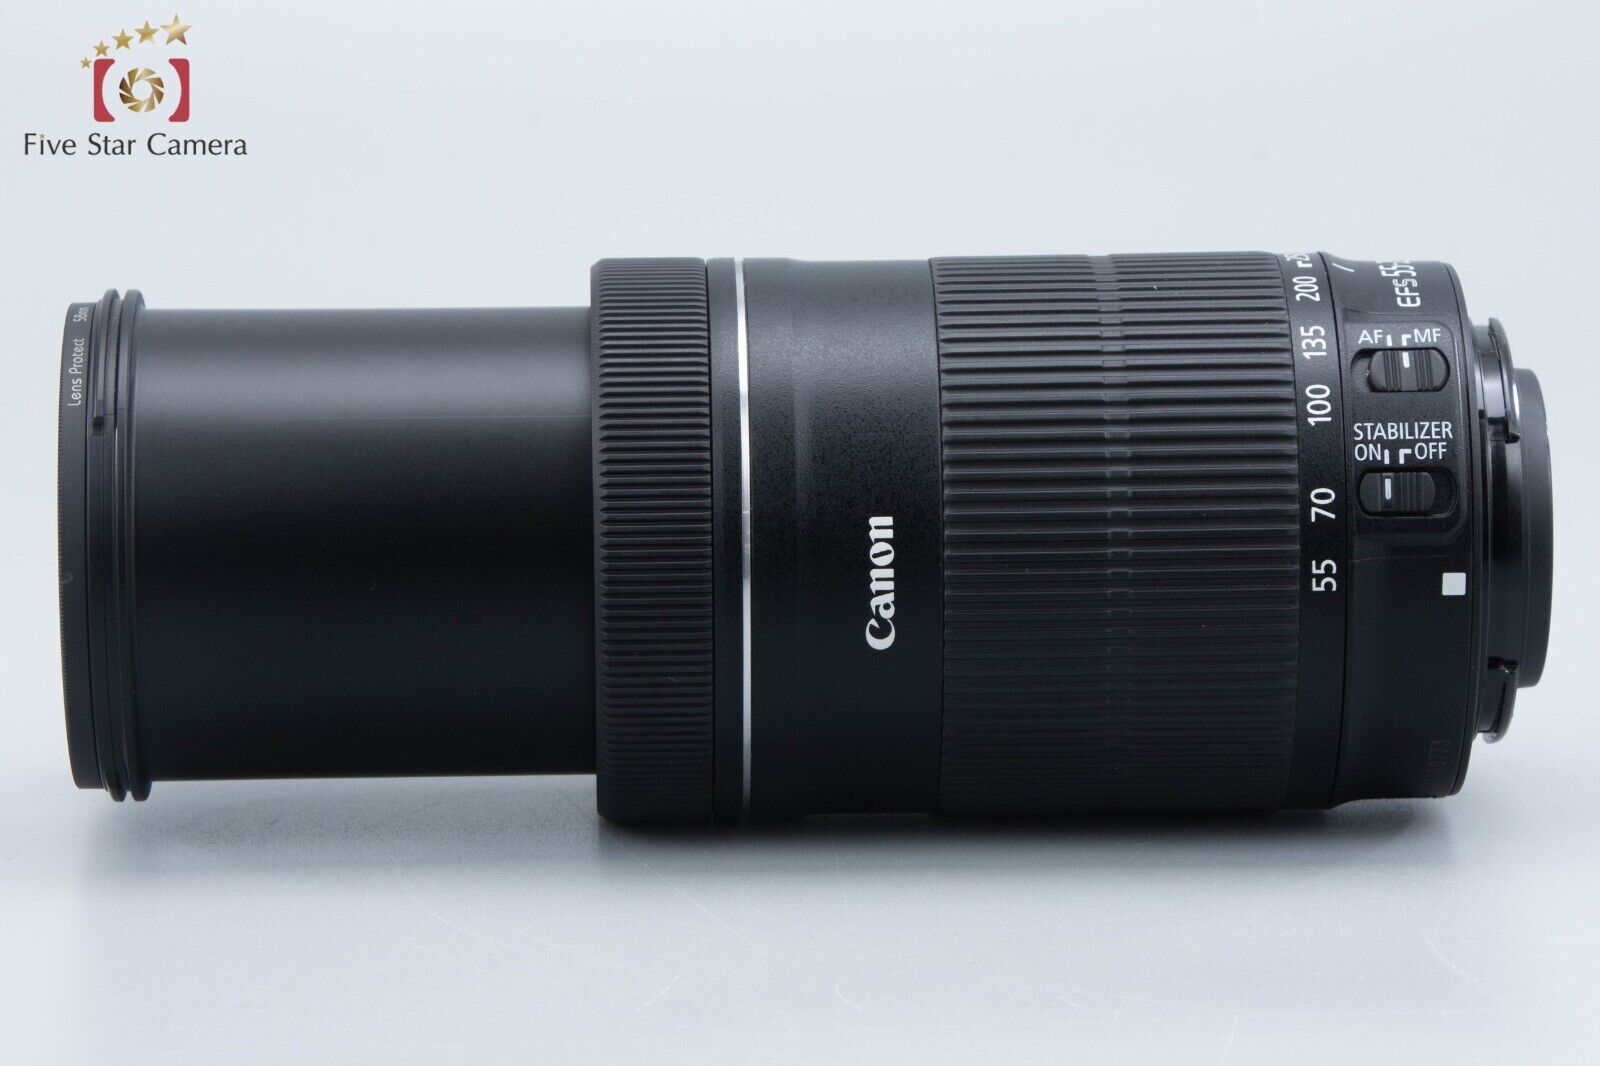 Excellent!! Canon EF-S 55-250mm f/4-5.6 IS STM